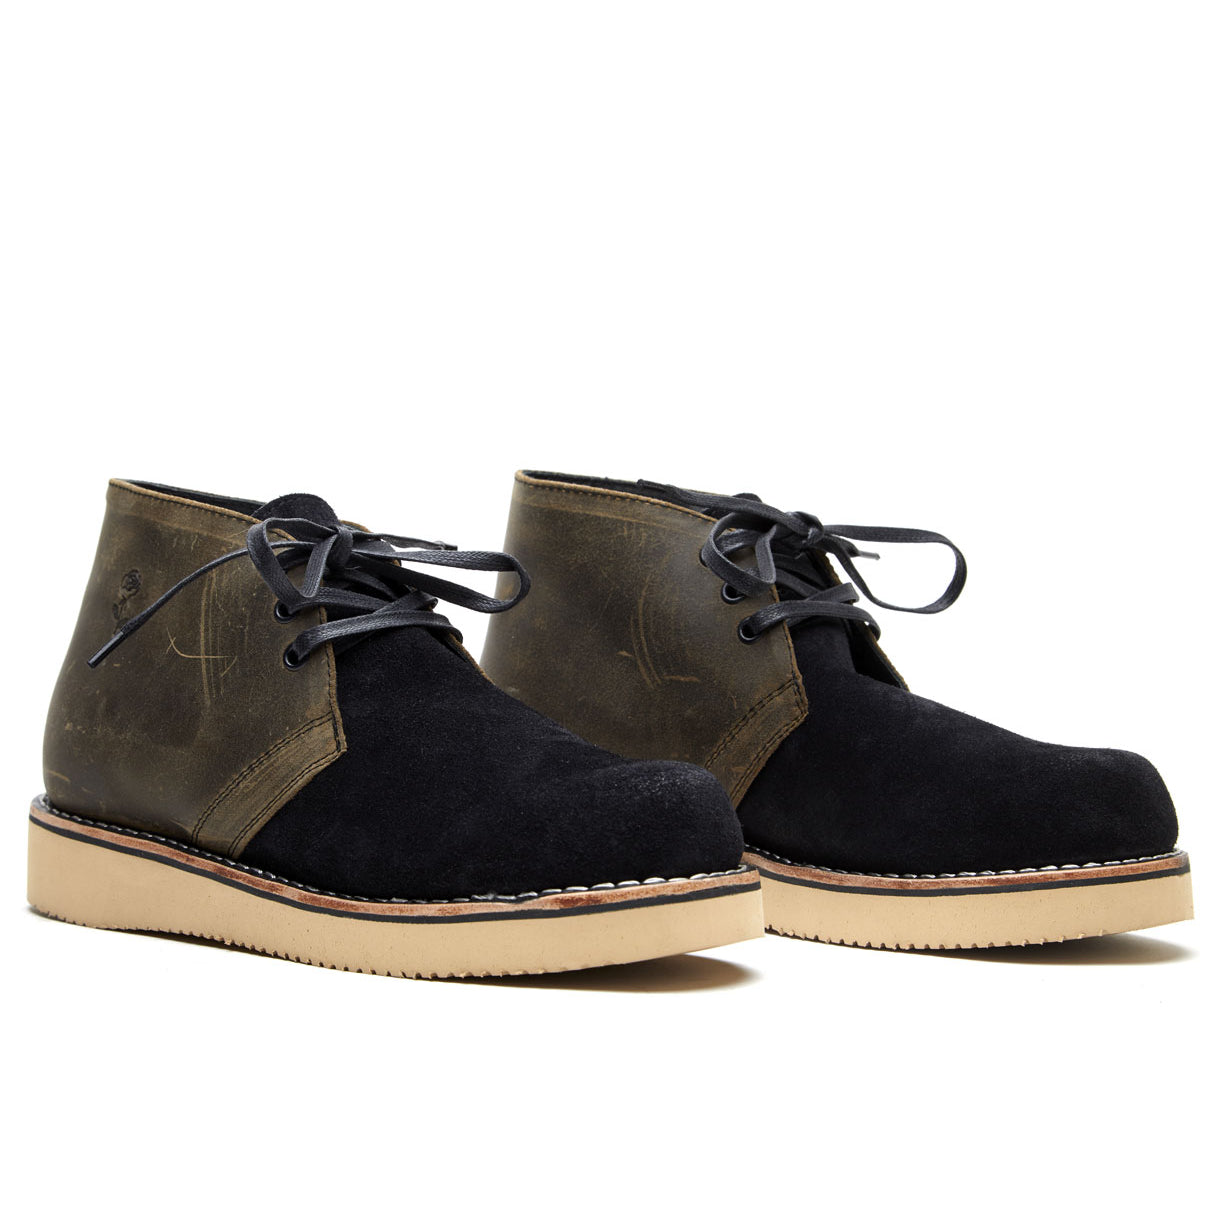 A pair of black suede Union chukka boots from the Santa Rosa Brand collection, featuring a Union boot design and goodyear welt construction, showcased on a white background.